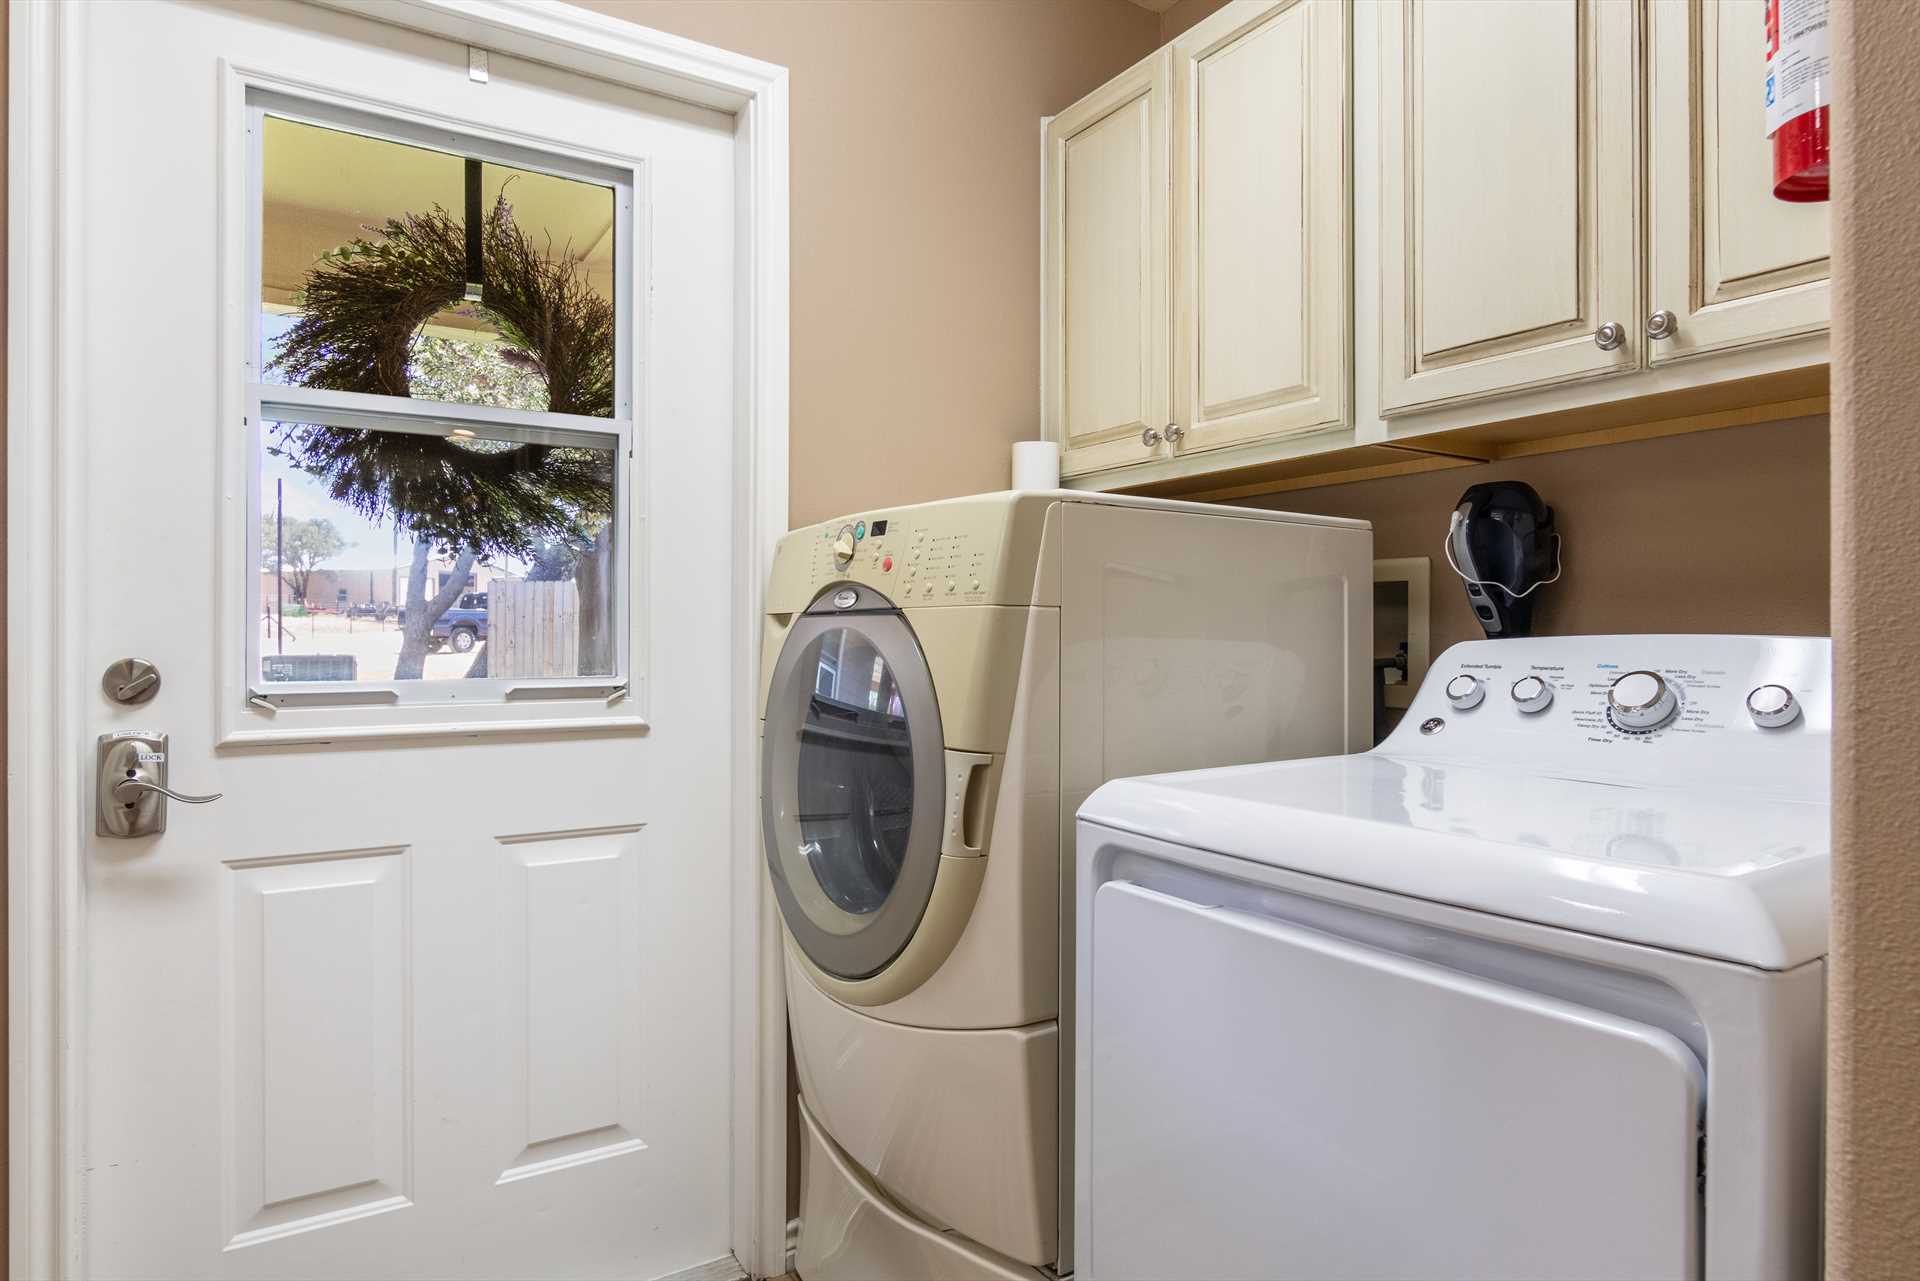                                                 A convenient washer and dryer will keep you ahead of laundry piling up!